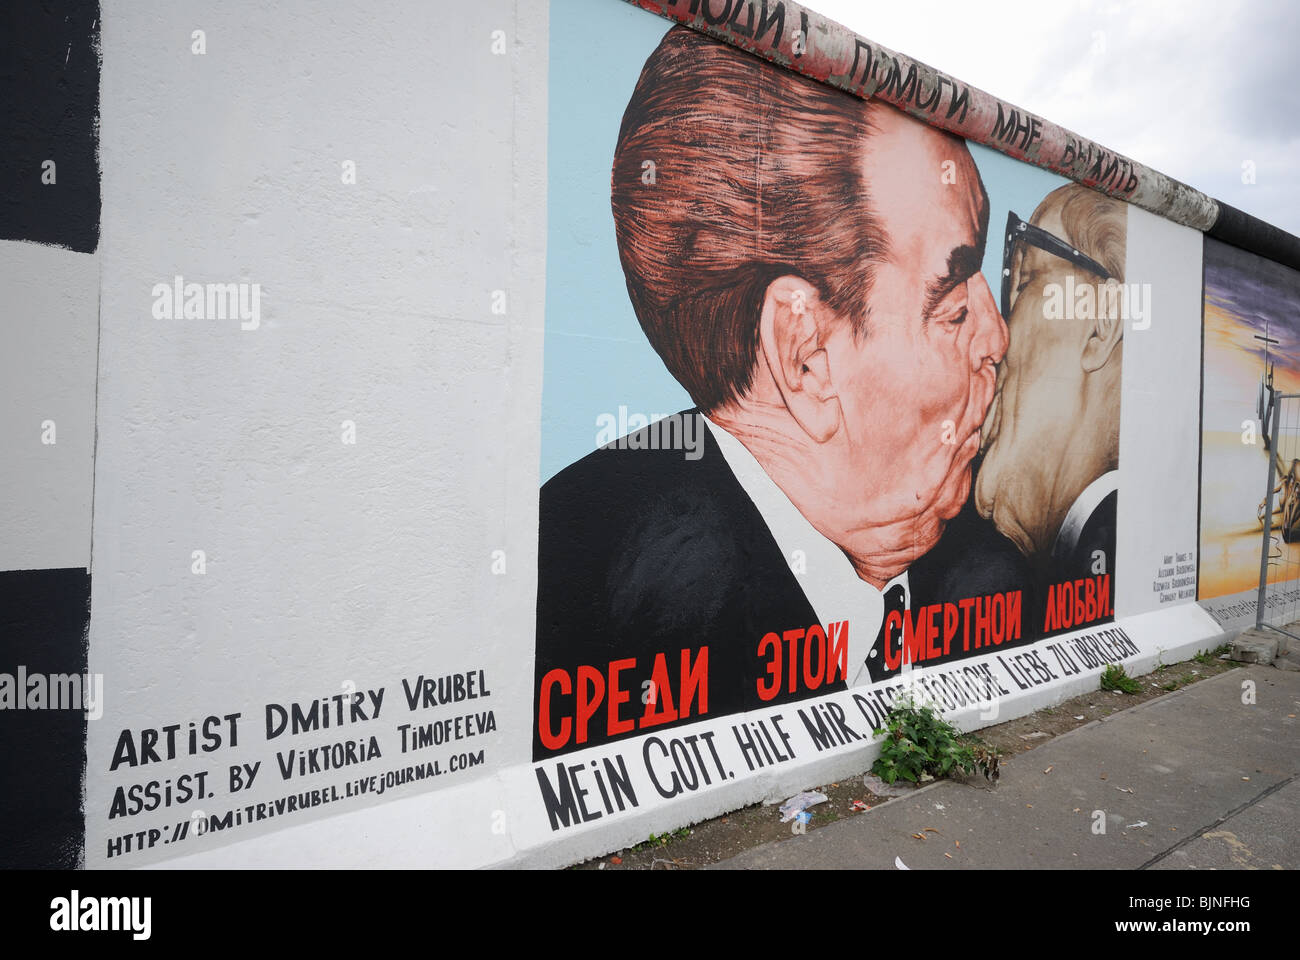 Eastside Gallery, Mortal Kiss or Kiss of Death, painting on the remaining part of the Berlin Wall, Berlin, Germany, Europe. Stock Photo